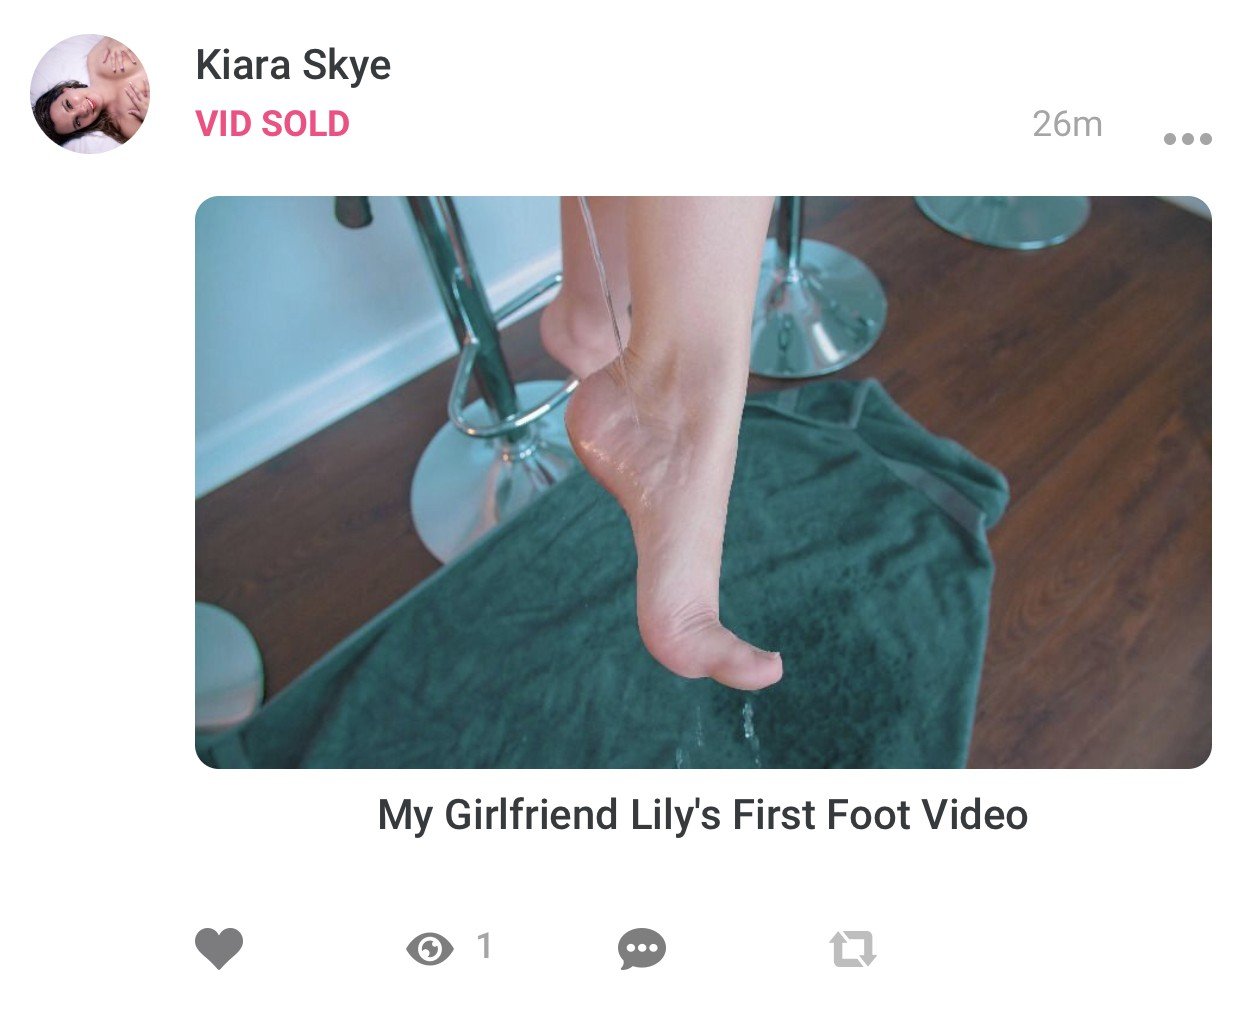 Photo by Kiara Skye with the username @KiaraSkye, who is a star user,  April 4, 2020 at 7:07 PM. The post is about the topic Foot Fetish and the text says 'SOLD SOLD SOLD! 💸💸💸💸

Get yours at https://kiaravids.com 🎬


#feet #footjob #fj #pedicure #toes #bg #pawg #thick #footfetish #domme #findom #femdom #soles #wetfeet #pussy #amateur #brunette'